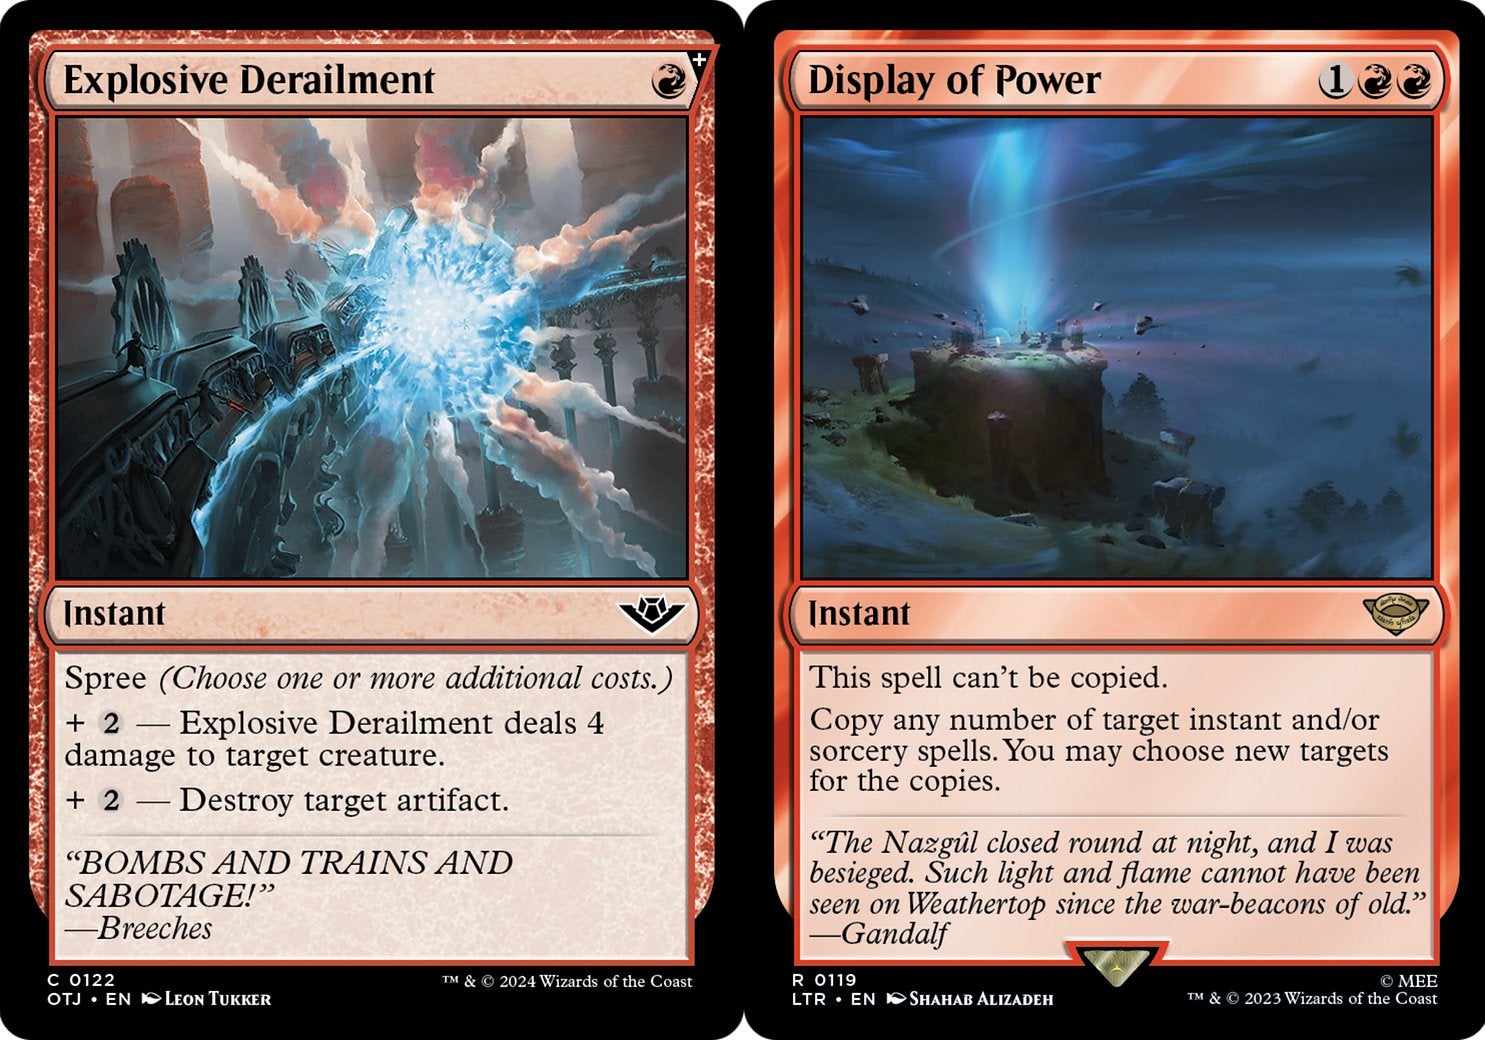 The Explosive Derailment and Display of Power red Instant cards from MTG.